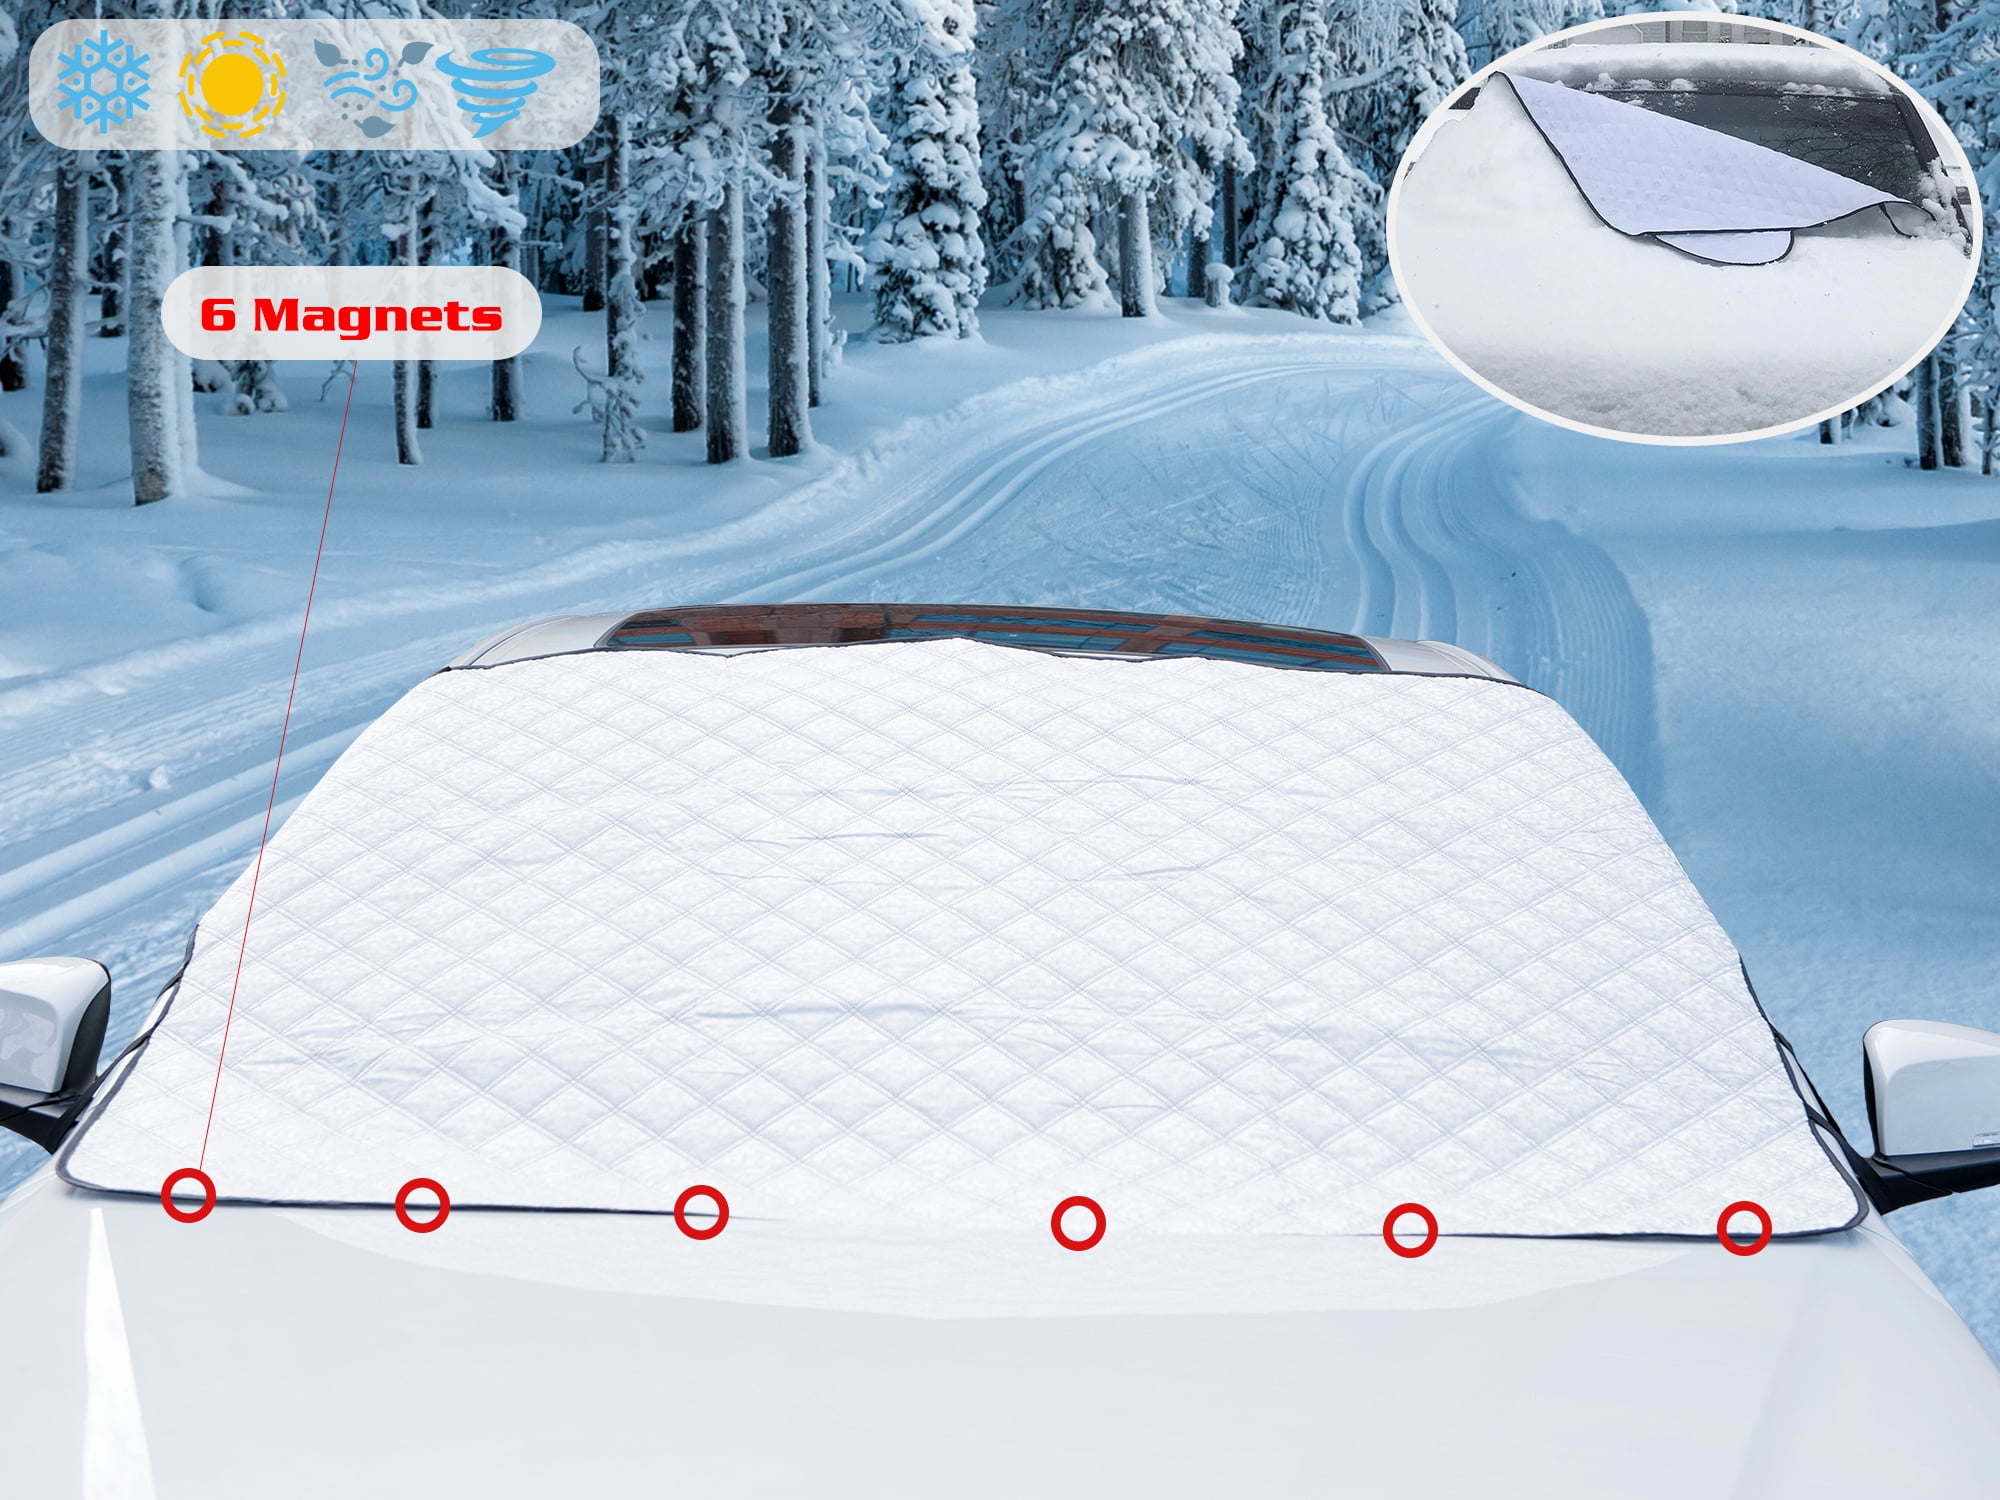 Custom Text Car Windshield Snow Cover, Fit with all car, Large Windshi